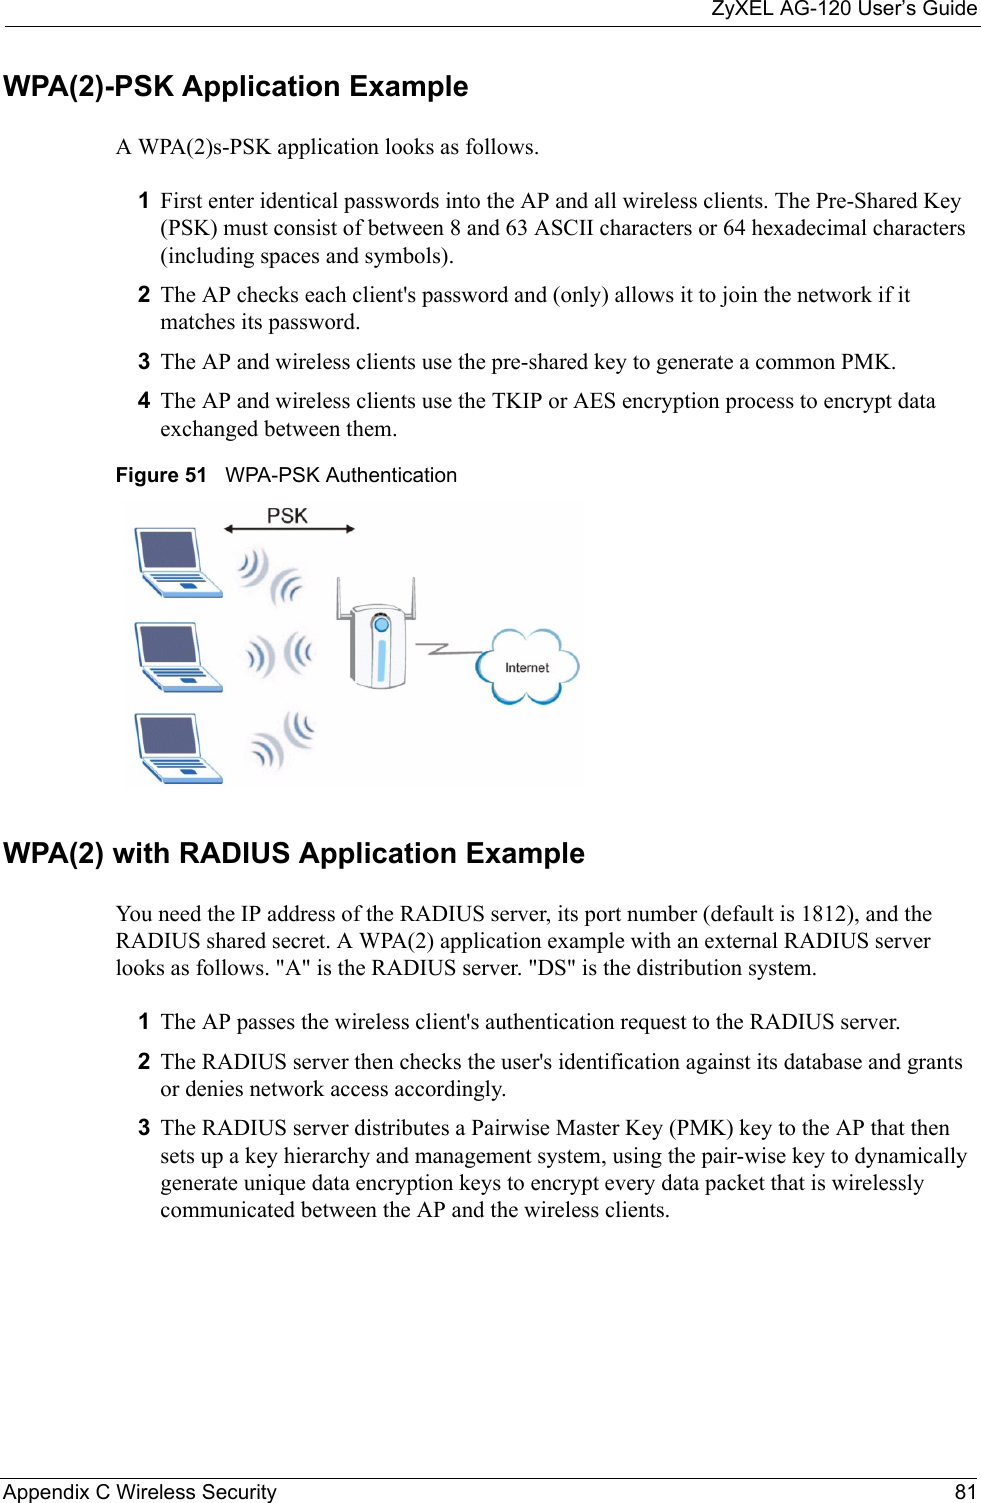 ZyXEL AG-120 User’s GuideAppendix C Wireless Security 81WPA(2)-PSK Application ExampleA WPA(2)s-PSK application looks as follows.1First enter identical passwords into the AP and all wireless clients. The Pre-Shared Key (PSK) must consist of between 8 and 63 ASCII characters or 64 hexadecimal characters (including spaces and symbols).2The AP checks each client&apos;s password and (only) allows it to join the network if it matches its password.3The AP and wireless clients use the pre-shared key to generate a common PMK.4The AP and wireless clients use the TKIP or AES encryption process to encrypt data exchanged between them.Figure 51   WPA-PSK AuthenticationWPA(2) with RADIUS Application ExampleYou need the IP address of the RADIUS server, its port number (default is 1812), and the RADIUS shared secret. A WPA(2) application example with an external RADIUS server looks as follows. &quot;A&quot; is the RADIUS server. &quot;DS&quot; is the distribution system.1The AP passes the wireless client&apos;s authentication request to the RADIUS server.2The RADIUS server then checks the user&apos;s identification against its database and grants or denies network access accordingly.3The RADIUS server distributes a Pairwise Master Key (PMK) key to the AP that then sets up a key hierarchy and management system, using the pair-wise key to dynamically generate unique data encryption keys to encrypt every data packet that is wirelessly communicated between the AP and the wireless clients.